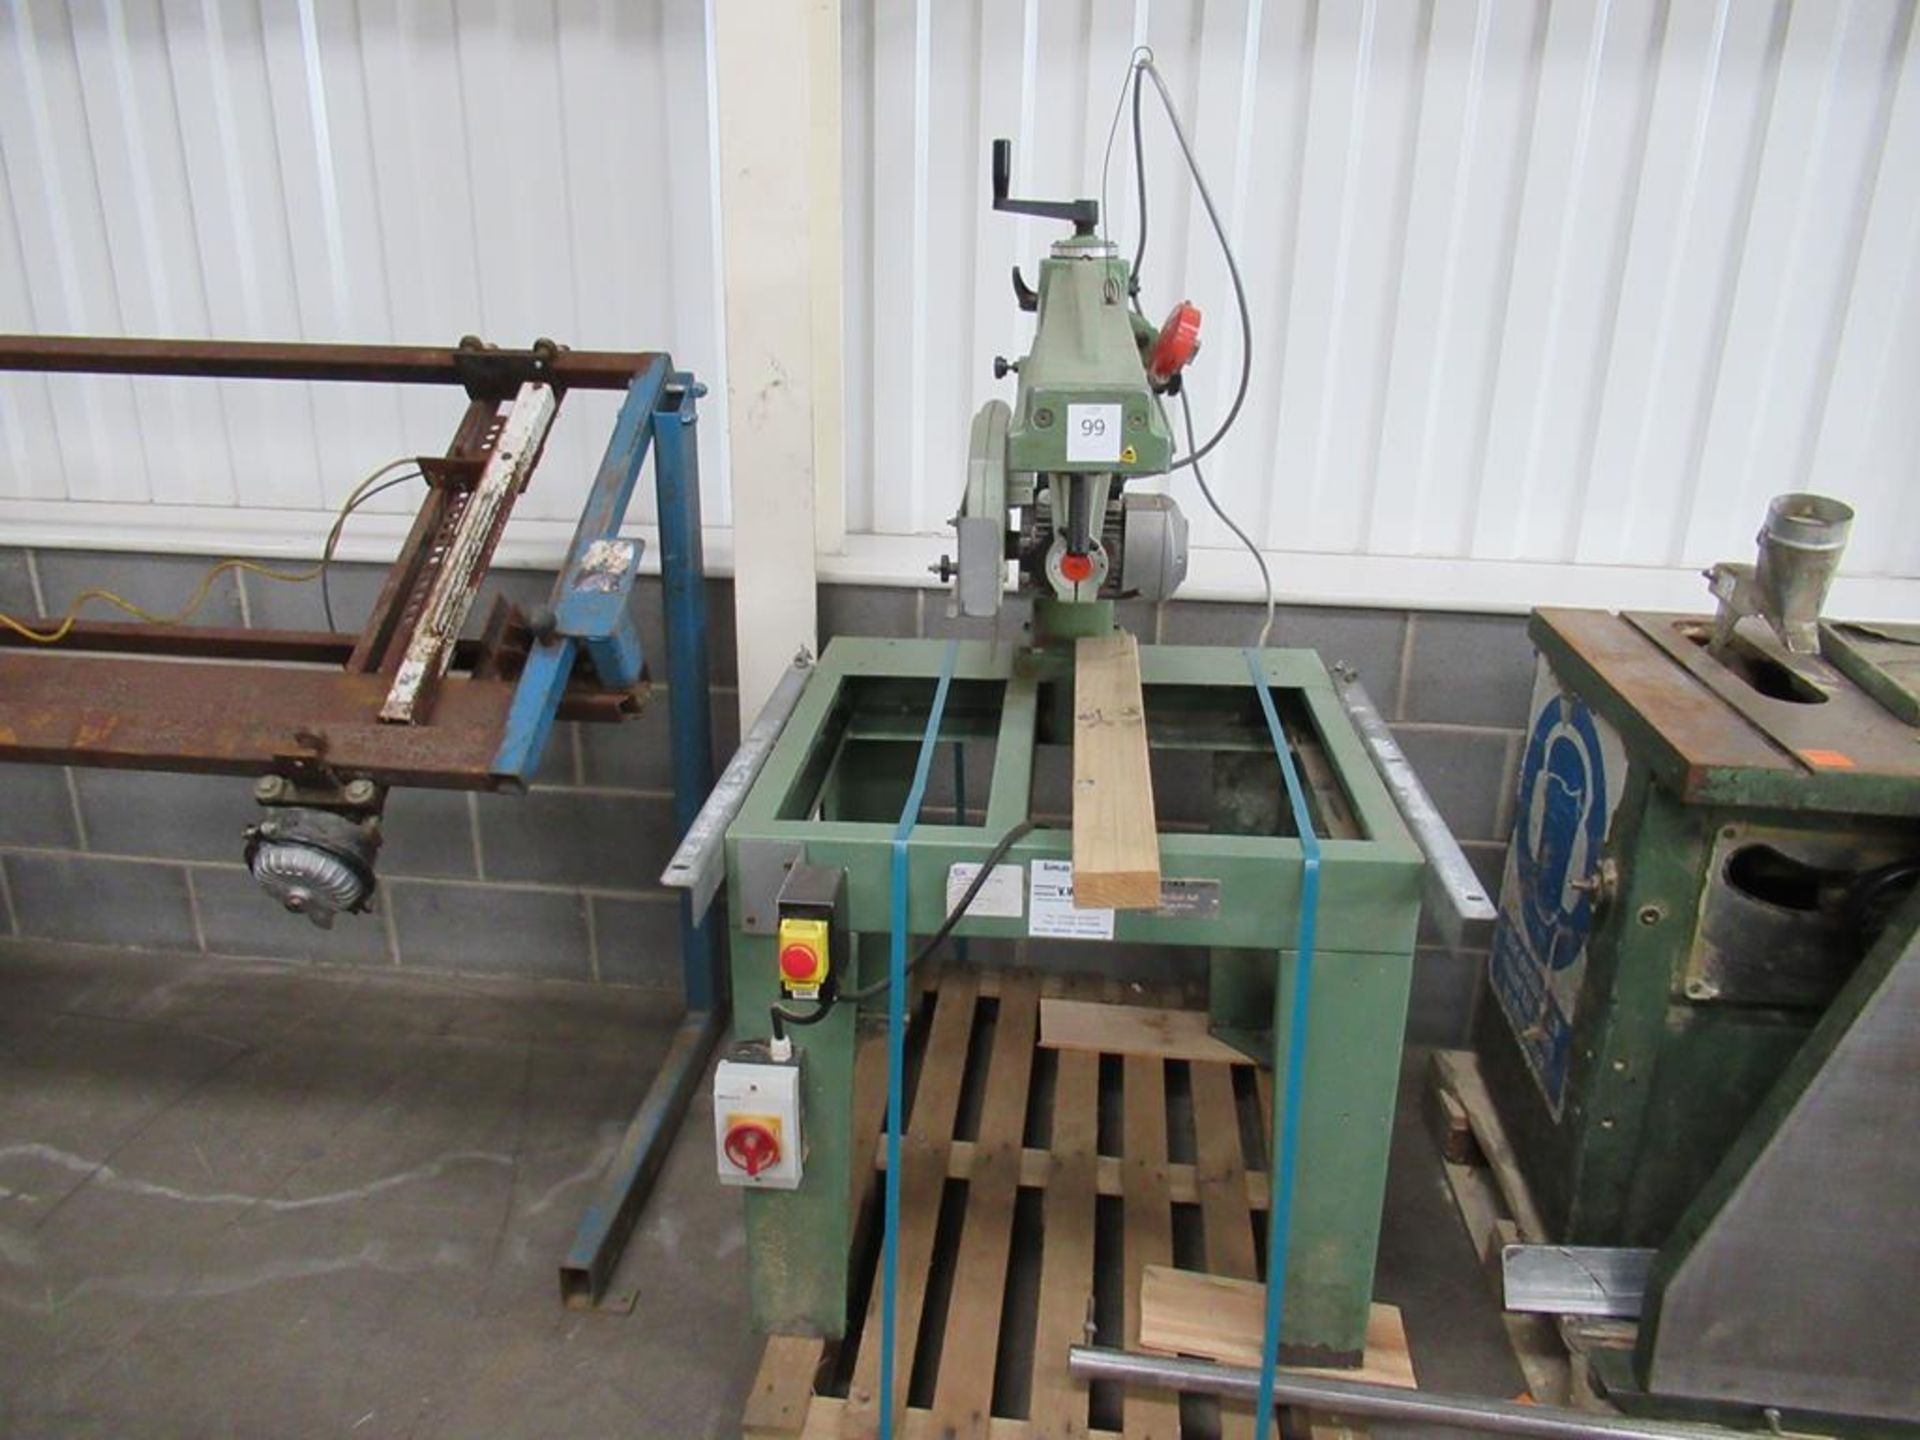 A rolessional radial arm cross cut saw, 415V, 3 phase.